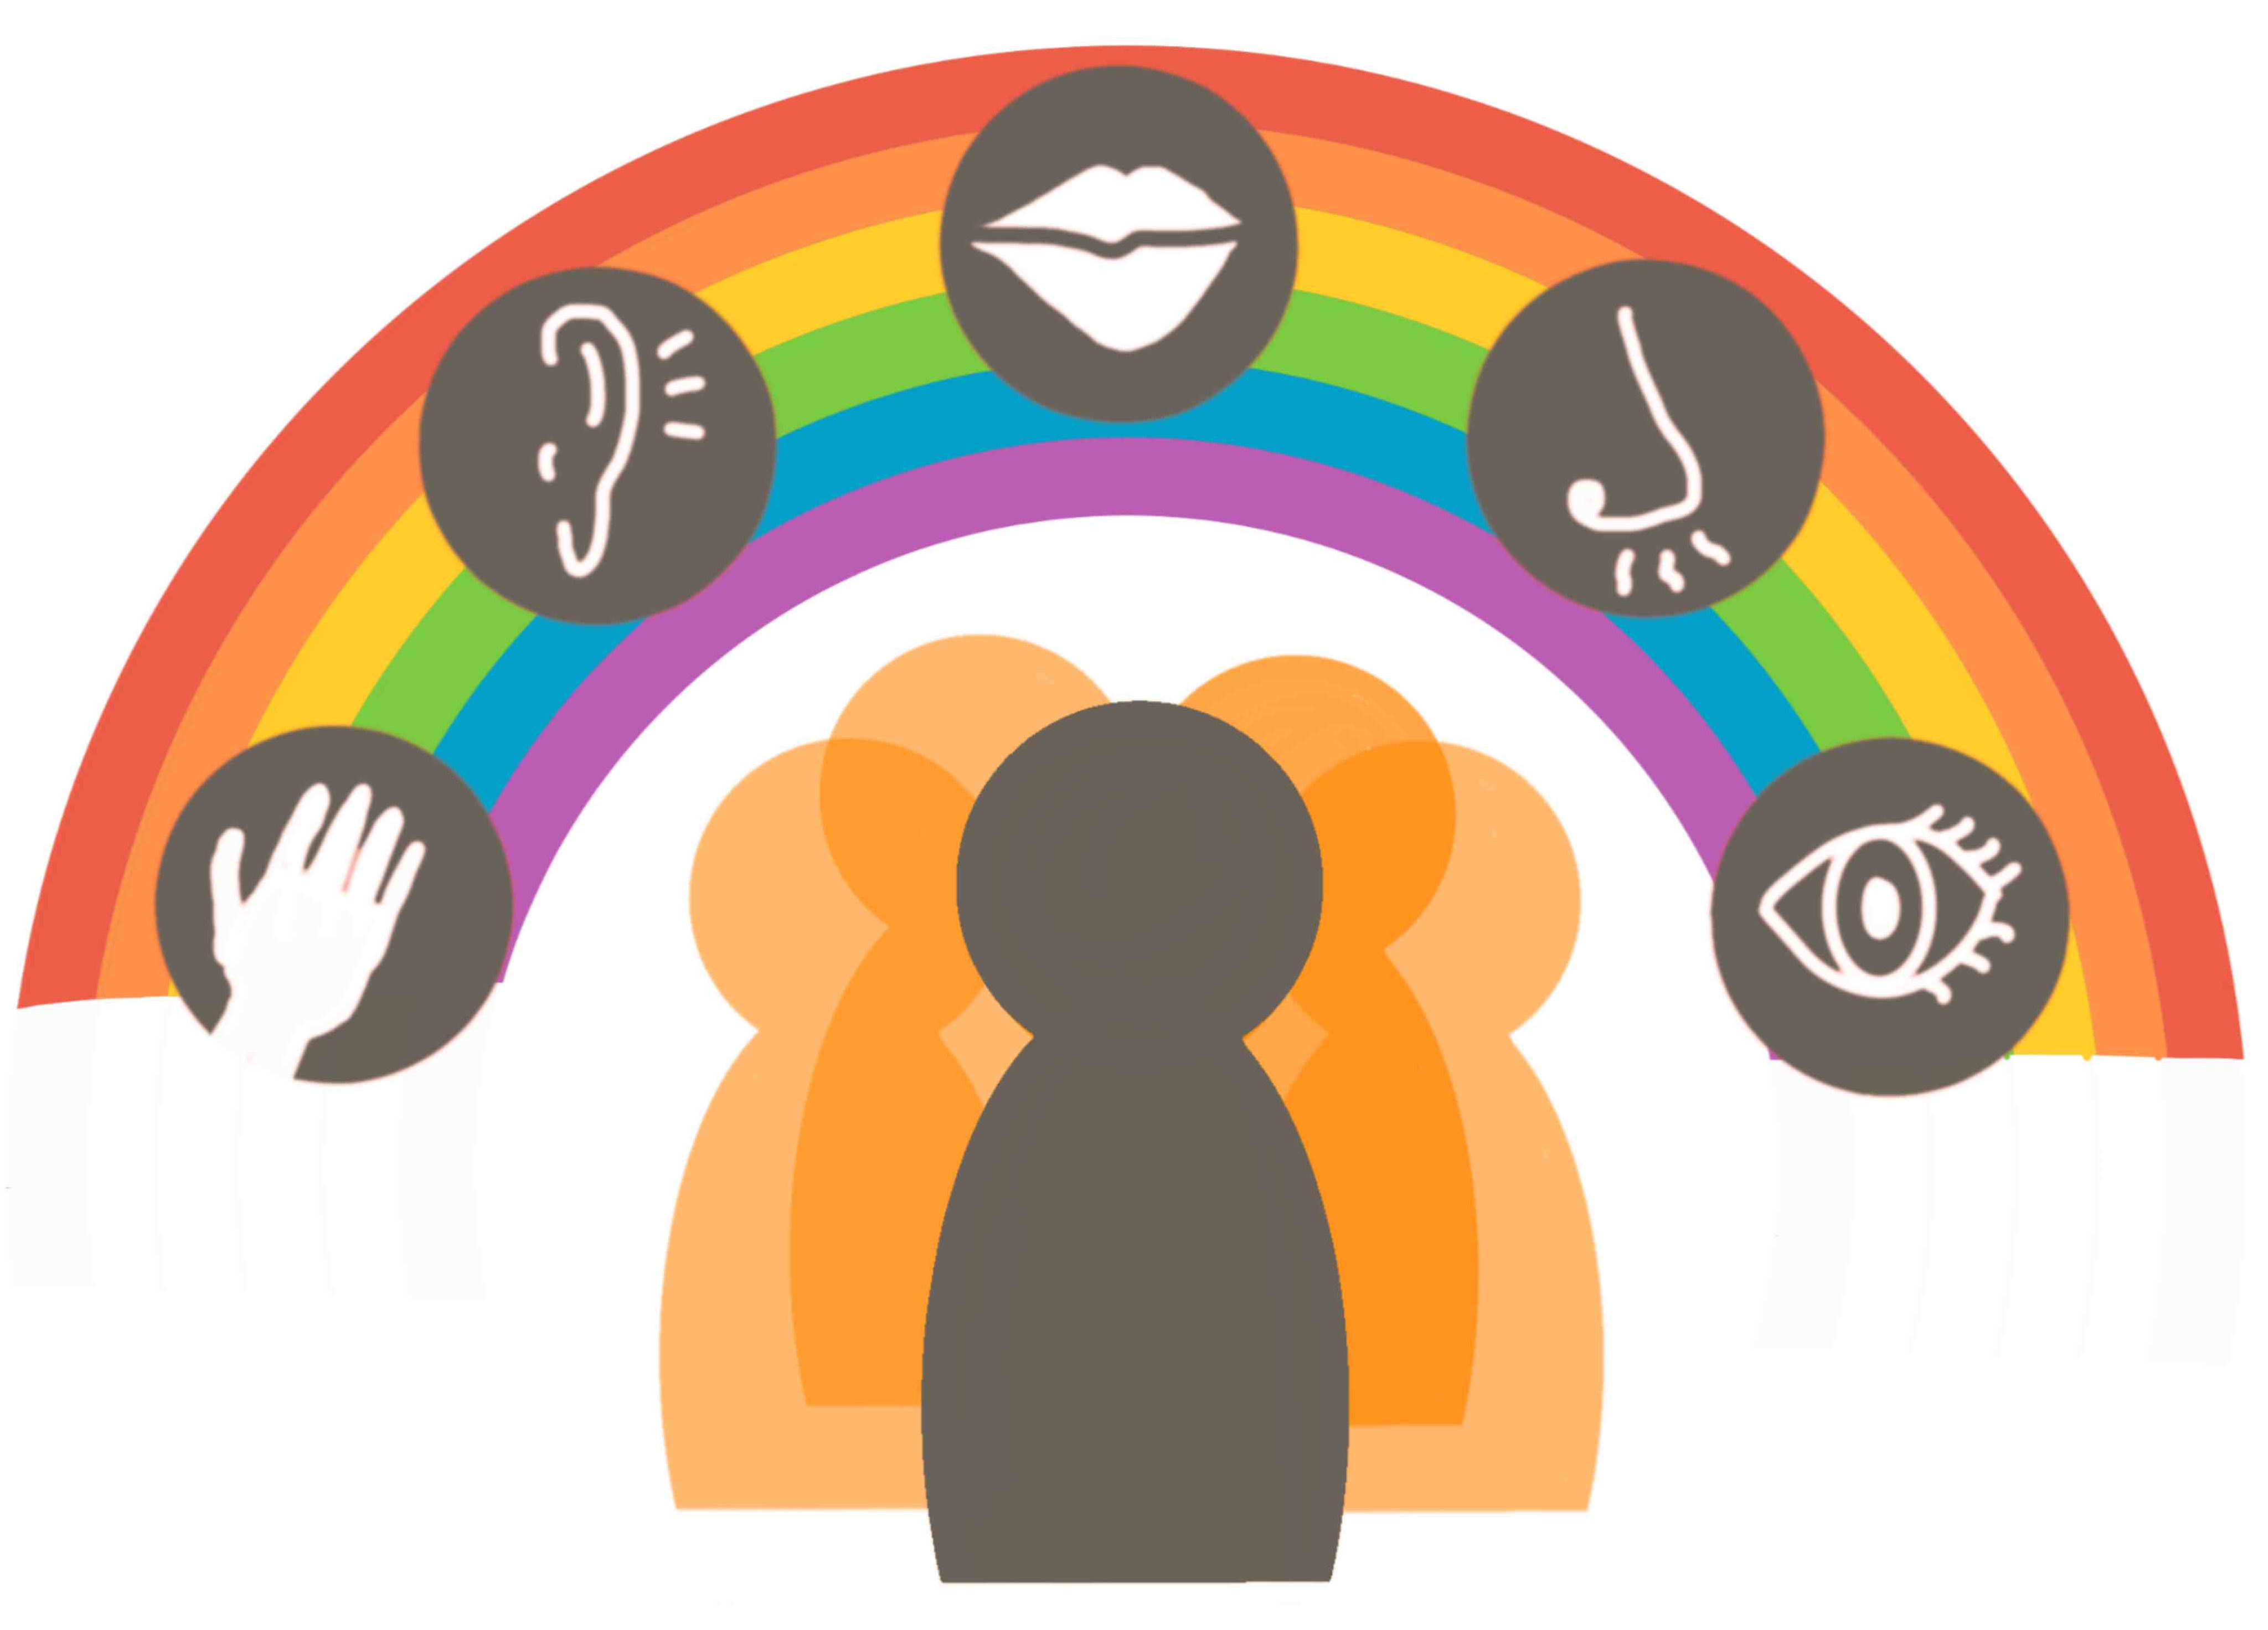 Multisensory hallucinations group logo - rainbow over people with images of the 5 senses - touch, hearing, taste, smell and sight